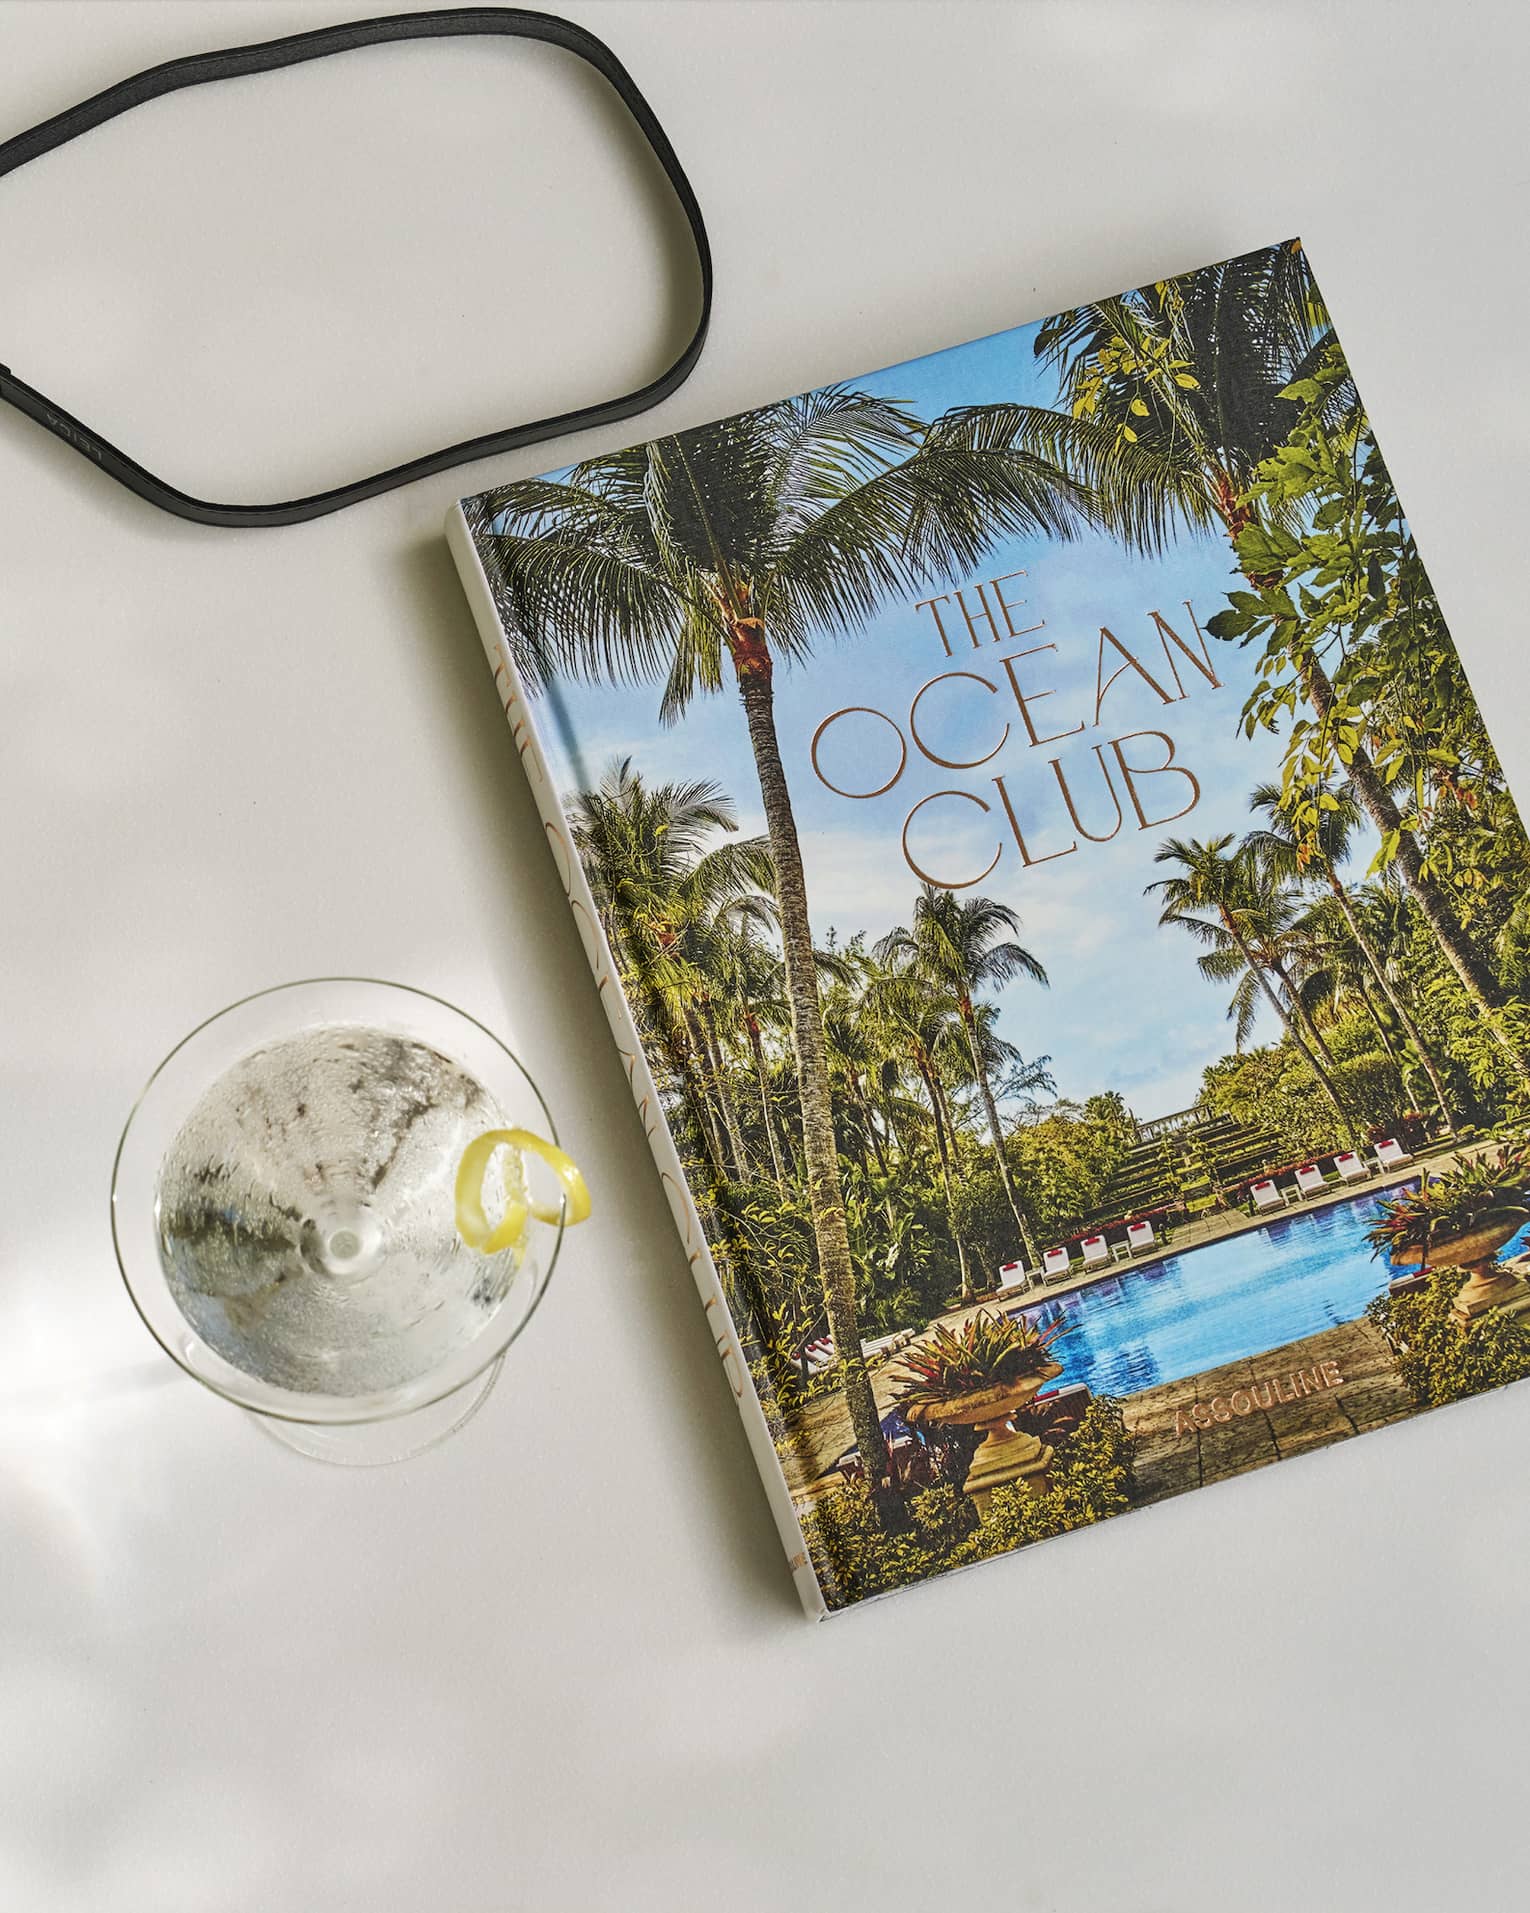 A large book with a pool and palm trees on the cover next to a drink and camera.